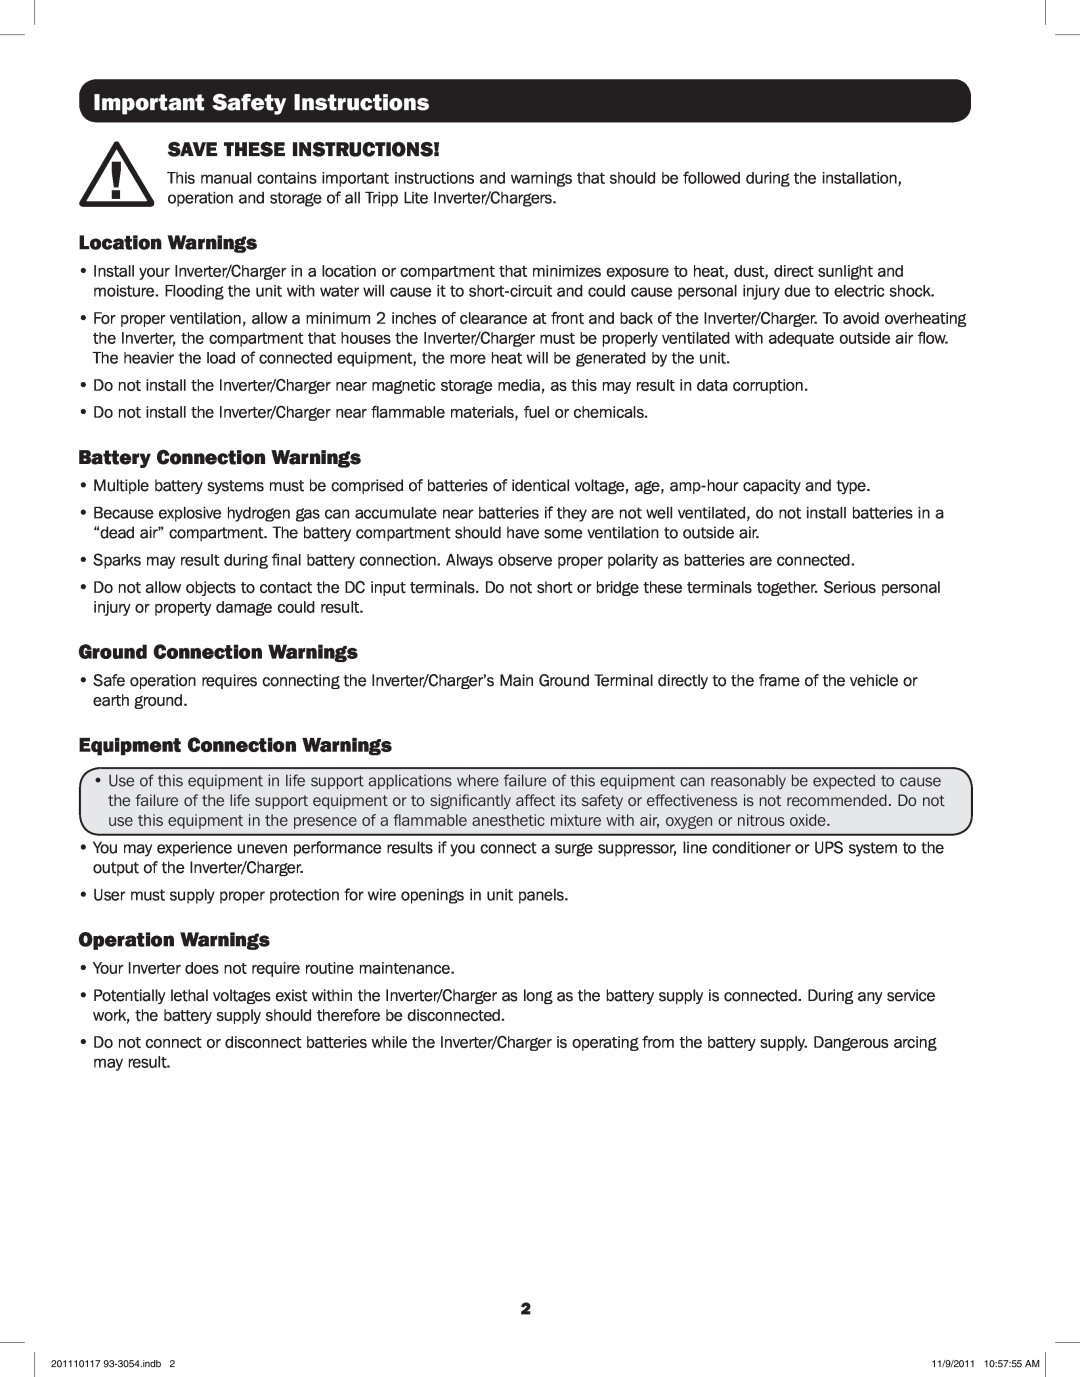 Tripp Lite APSX1012SW Important Safety Instructions, Save These Instructions, Location Warnings, Operation Warnings 